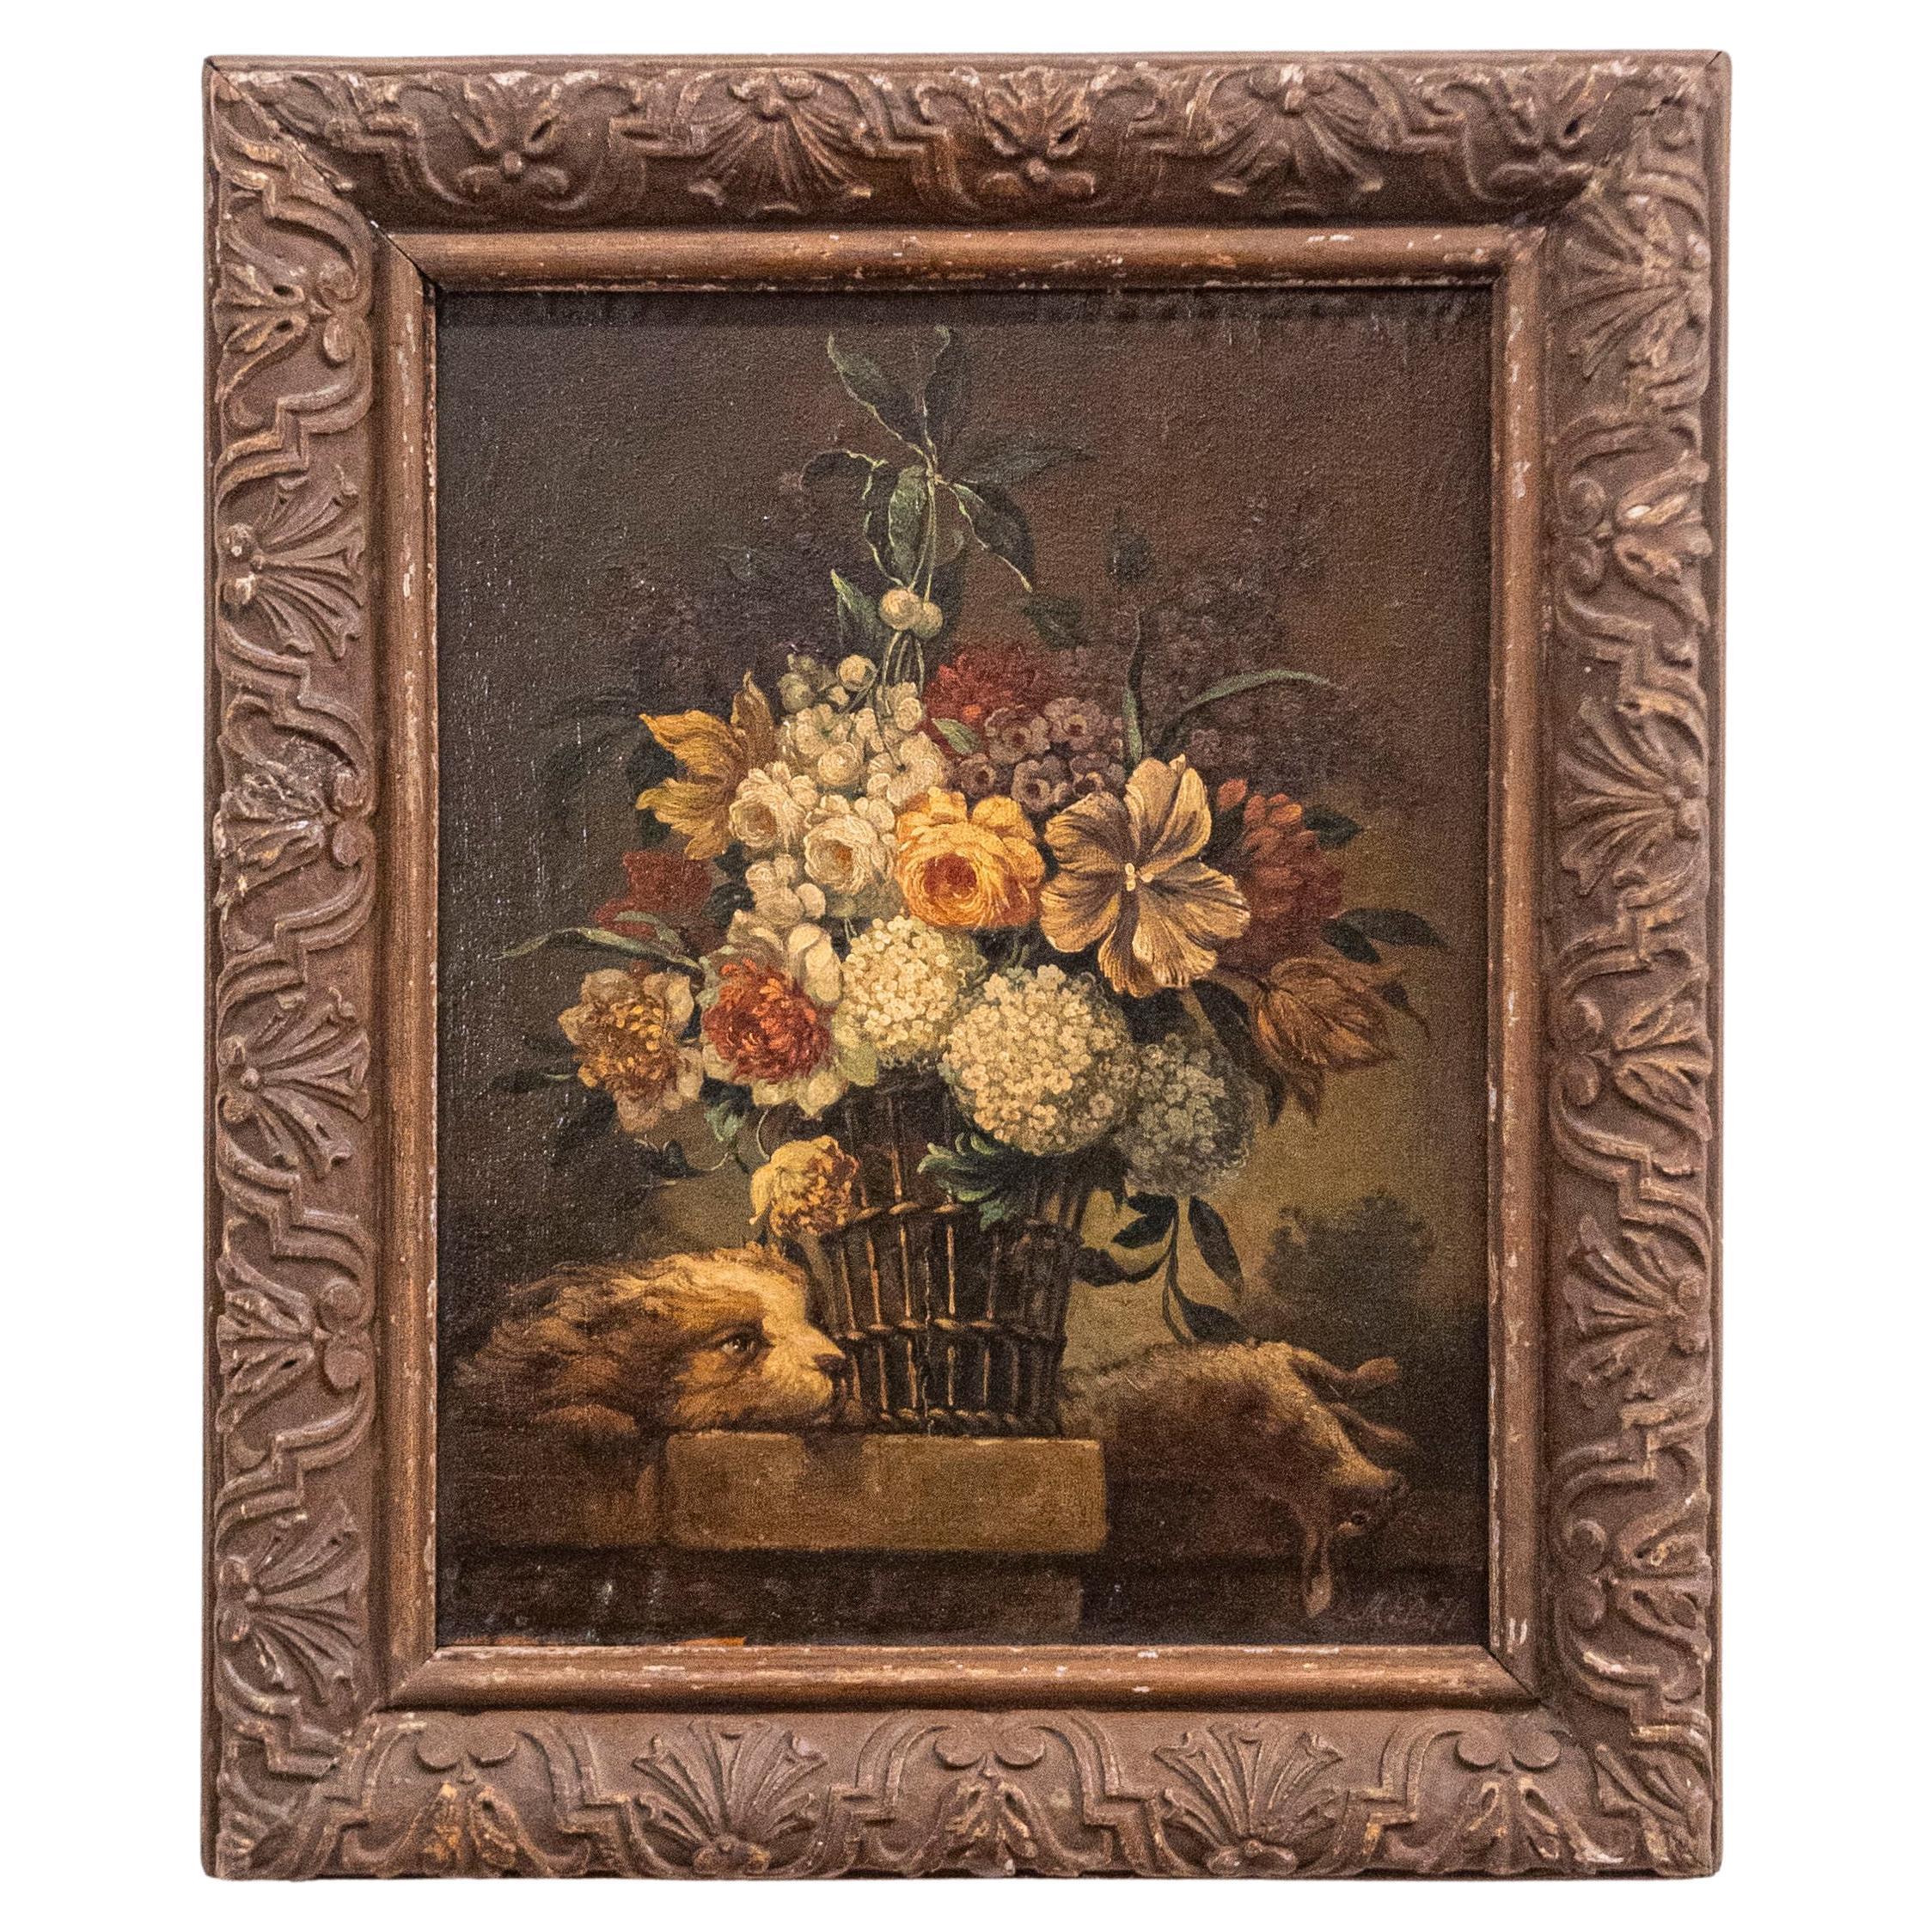 French 19th Century Framed Still-life Floral Painting with Dog and Rabbit Motifs For Sale